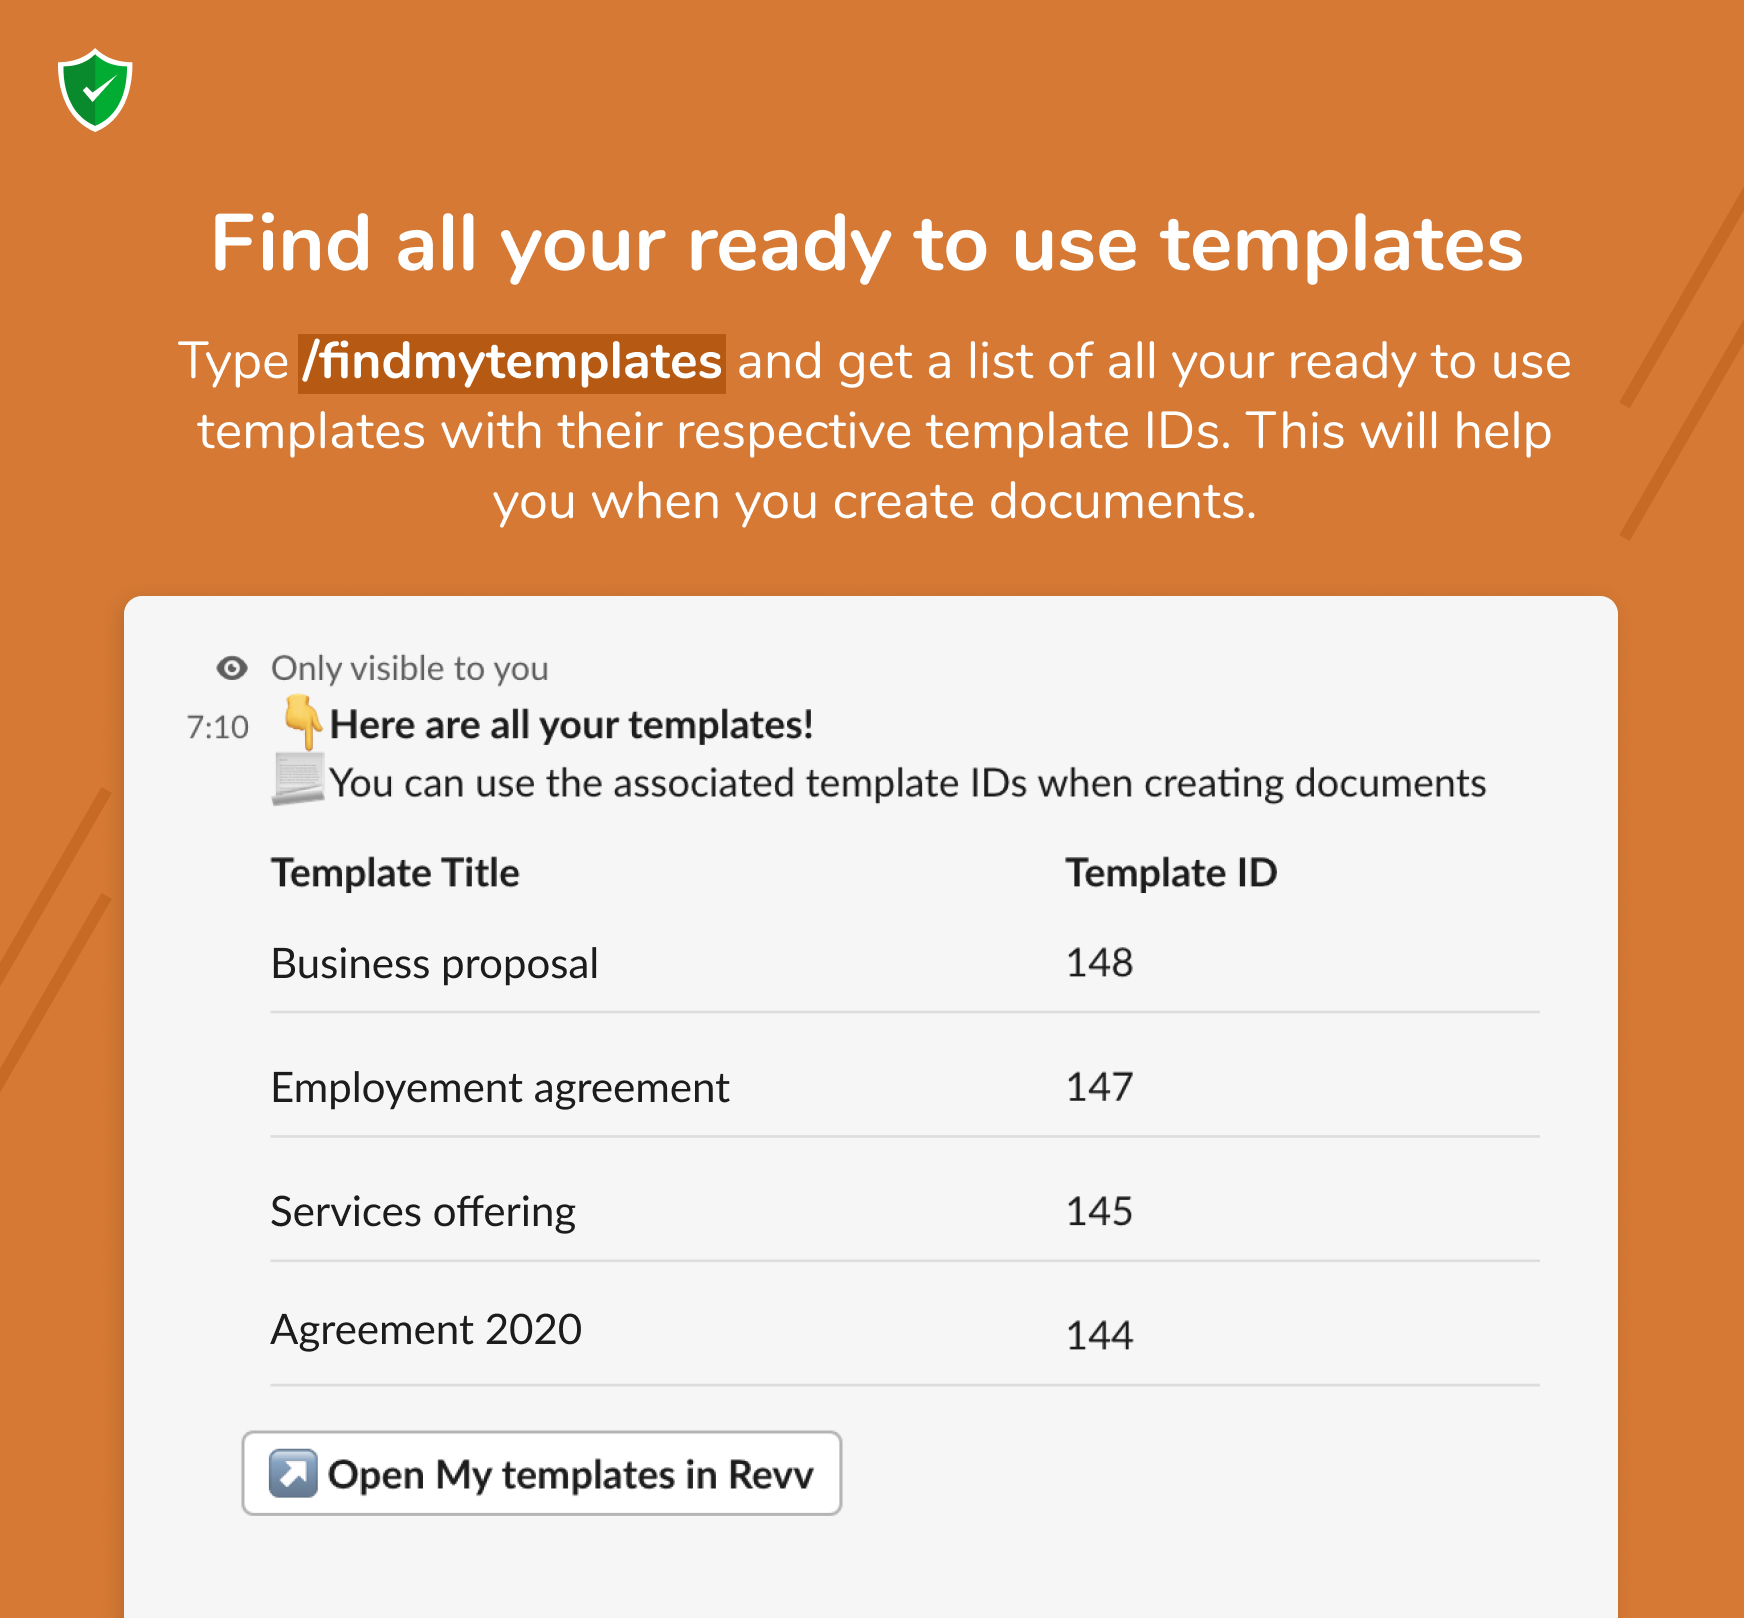 Now personalize your templates faster and optimize your business processes with Revv document builder.